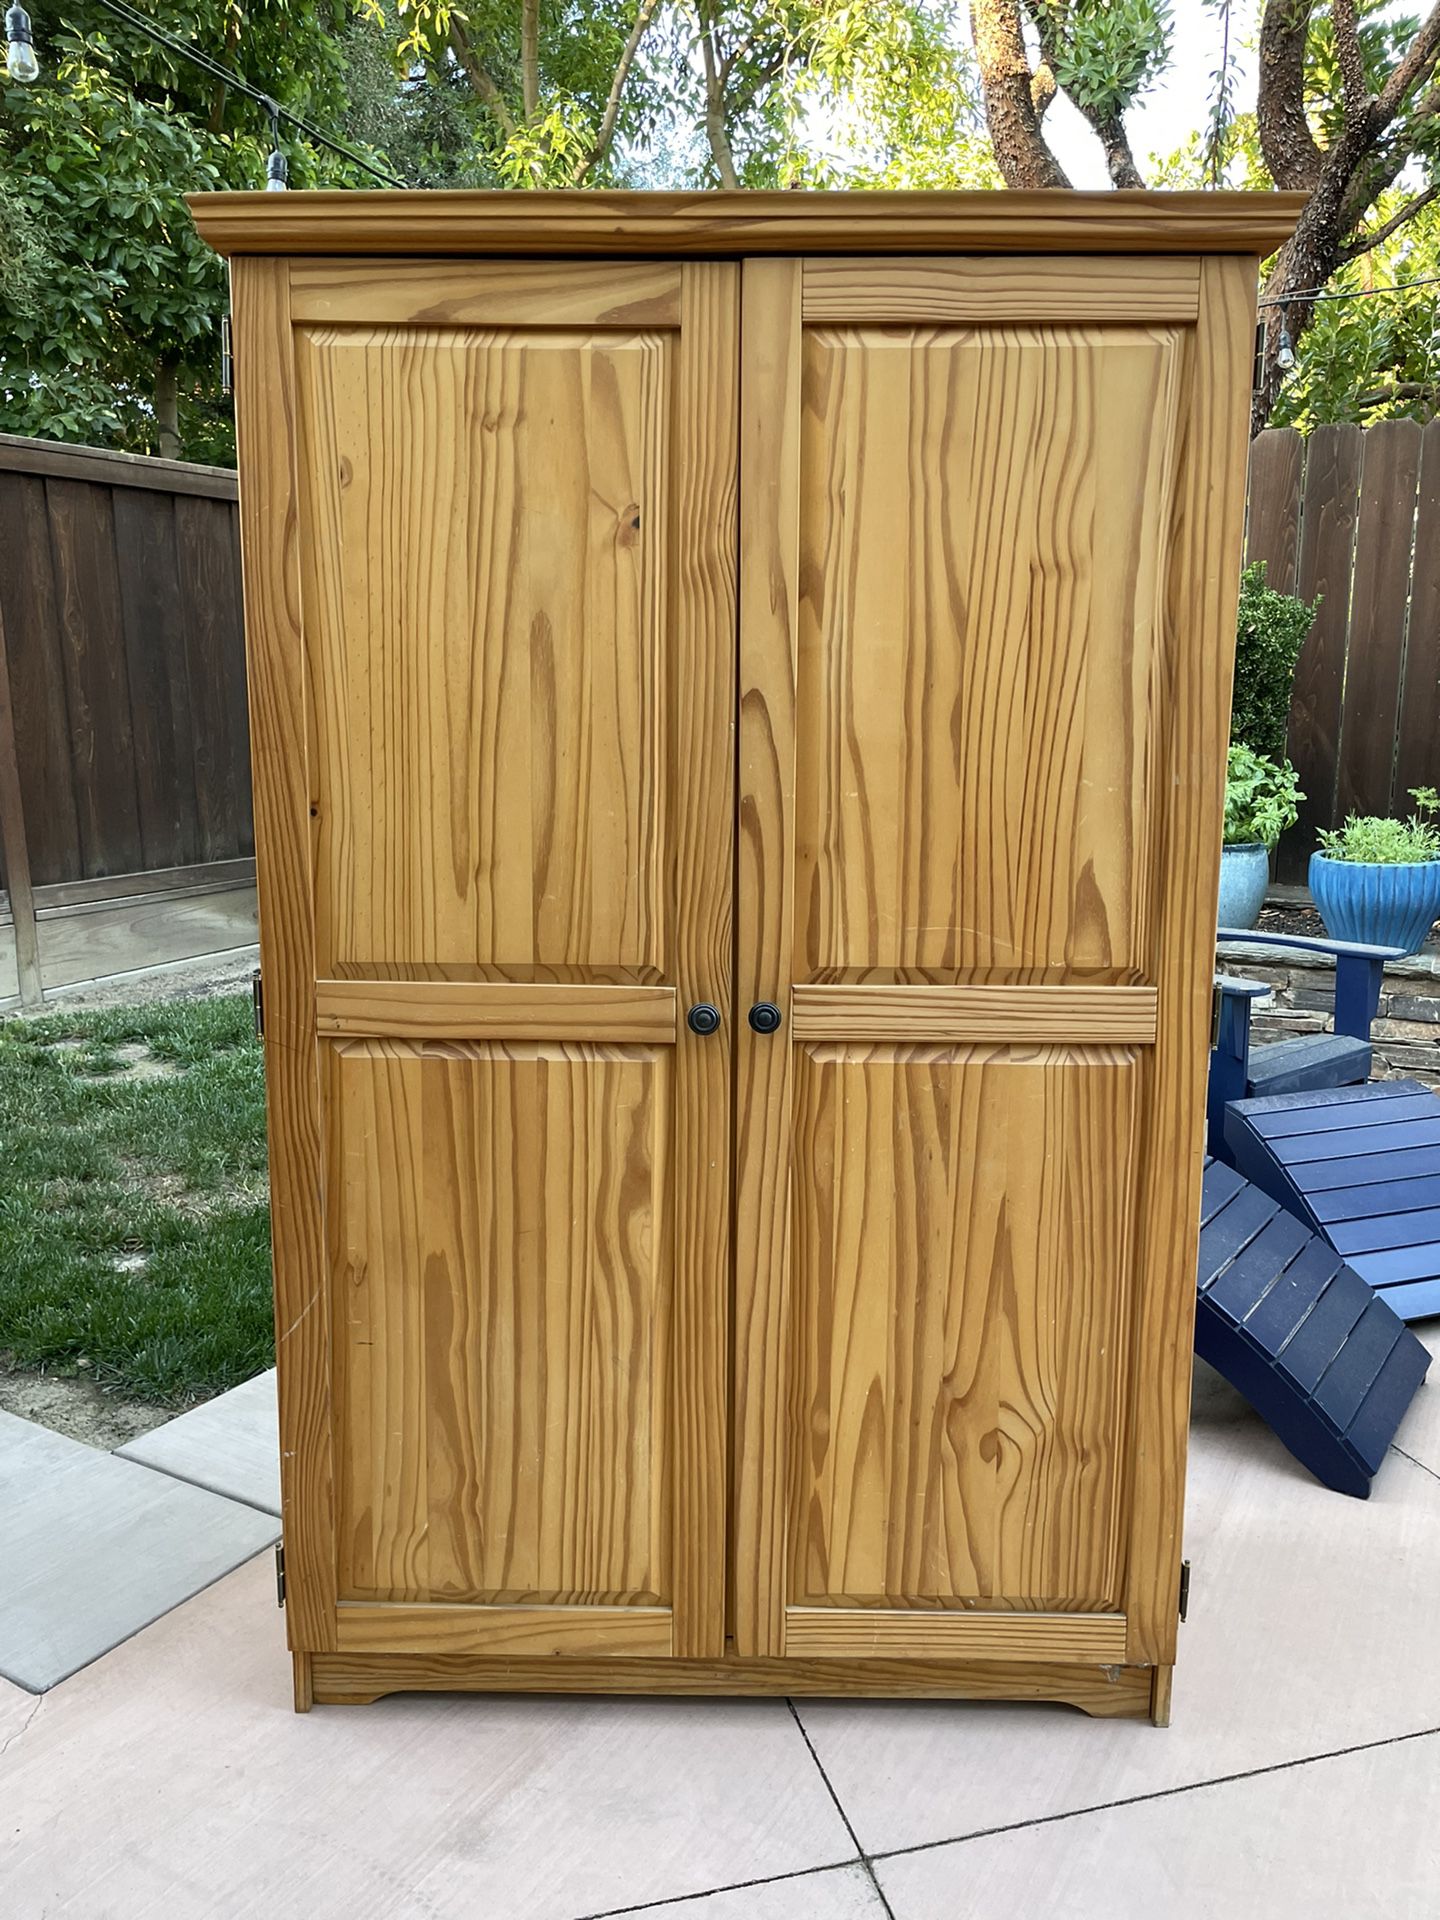 Price Cut! Great Unfinished Cabinet/Armoire